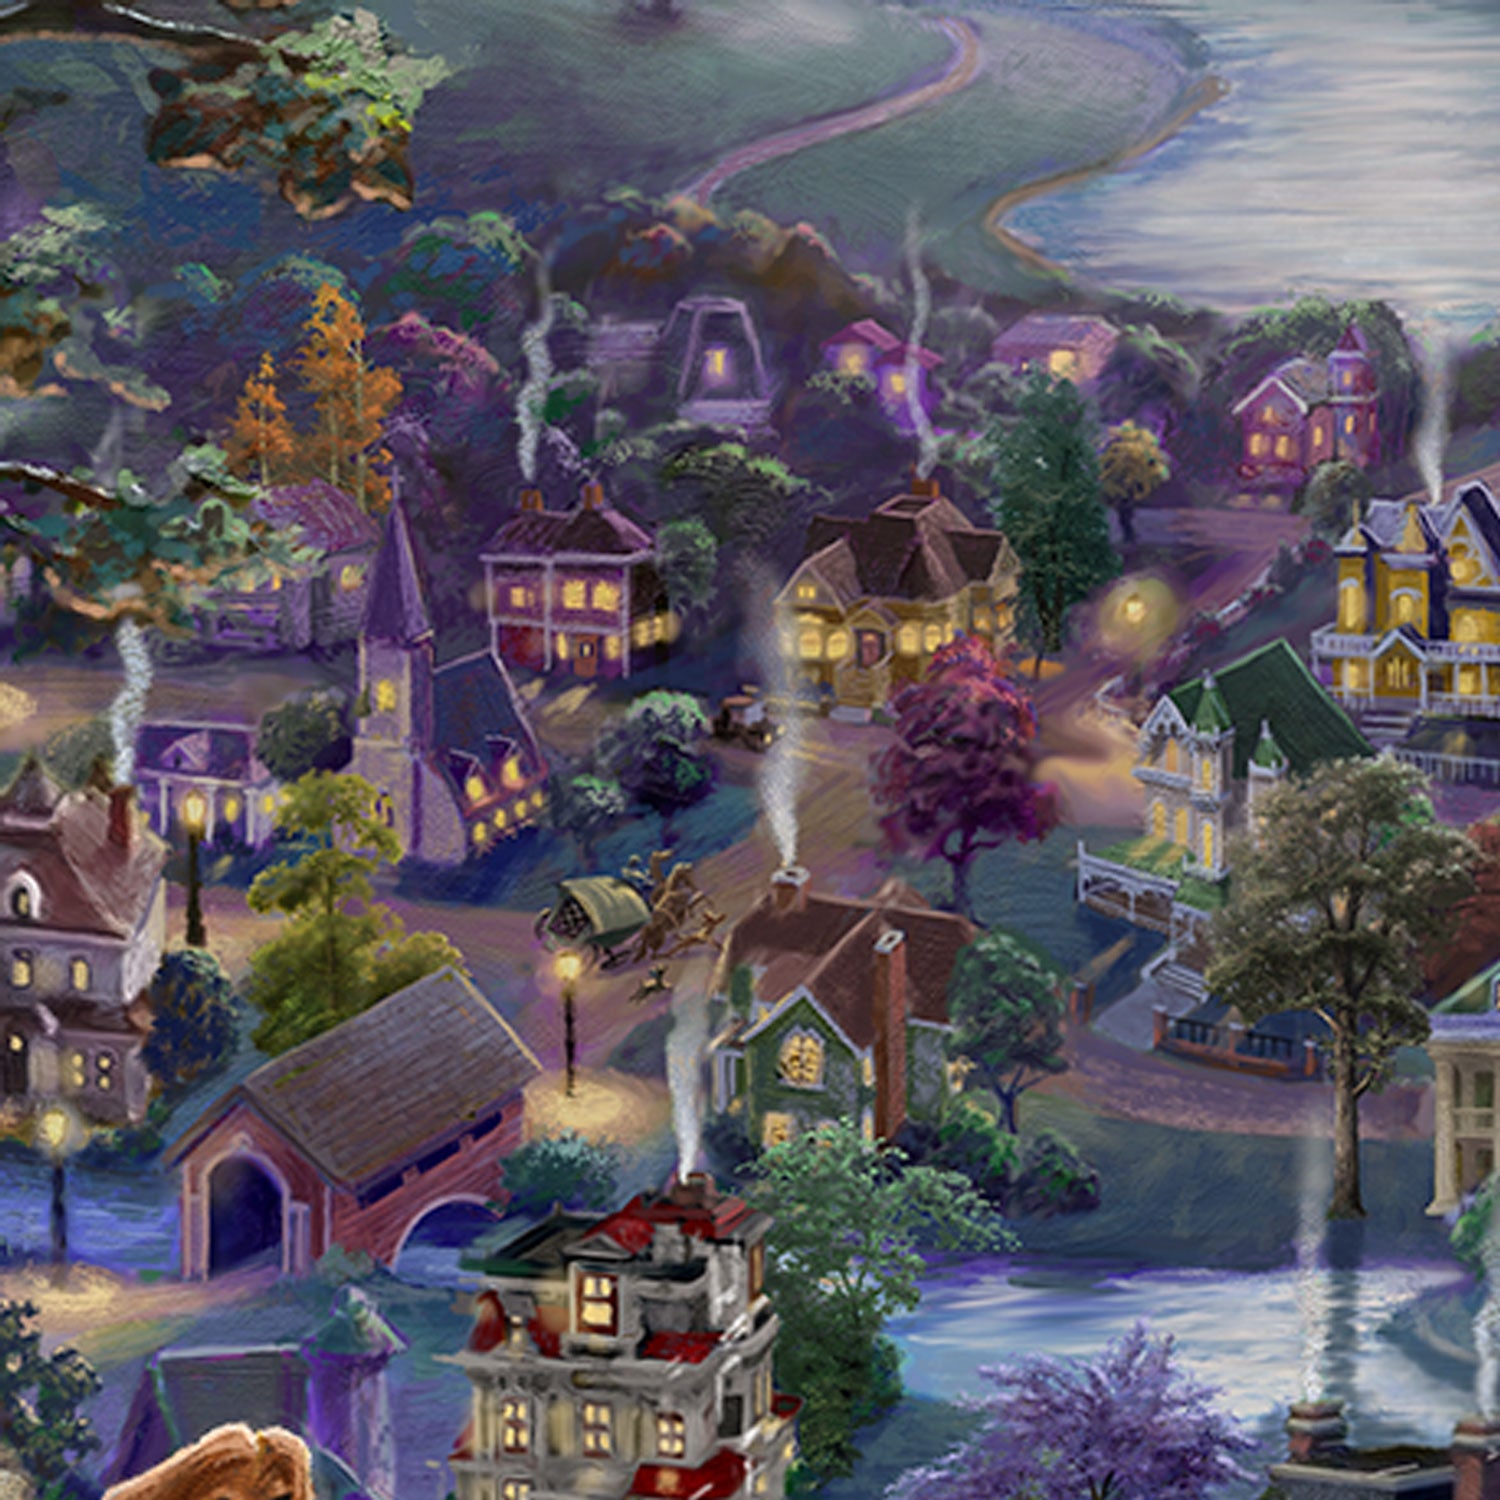 The village in the background is inspired by Walt Disney’s hometown of Marceline, Missouri.- closeup